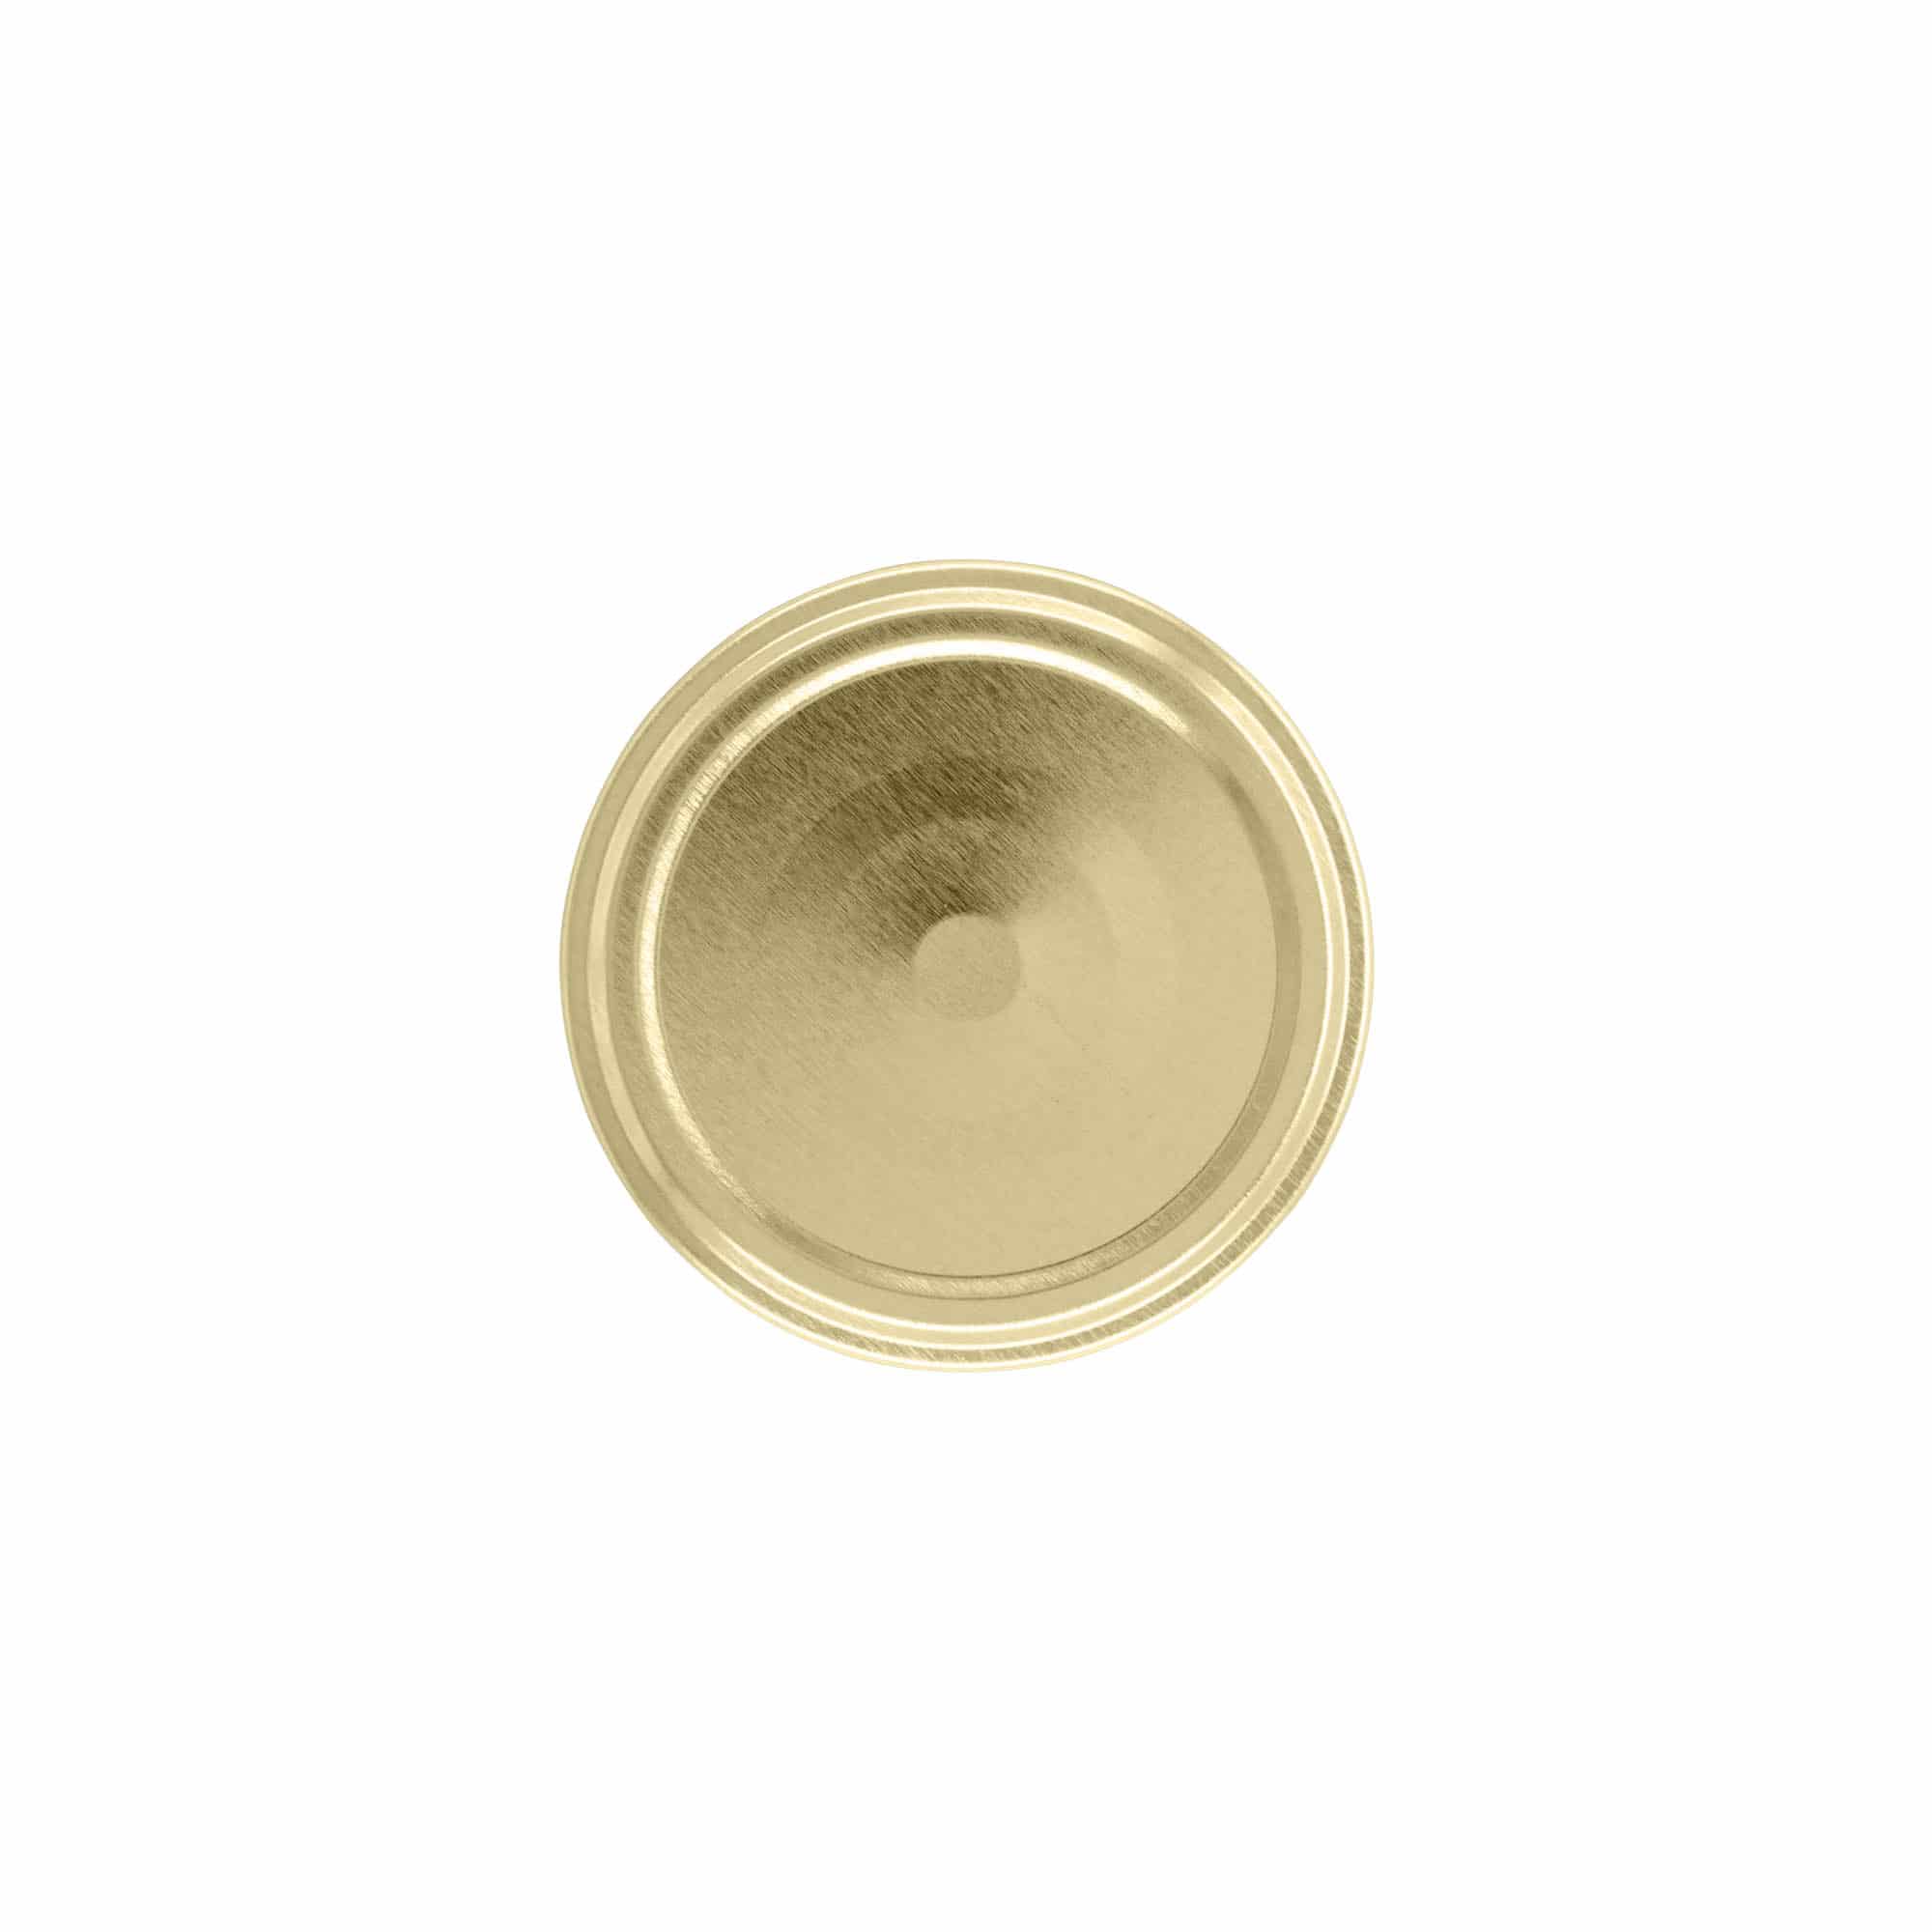 Twist off lid, tinplate, gold, for opening: TO 63